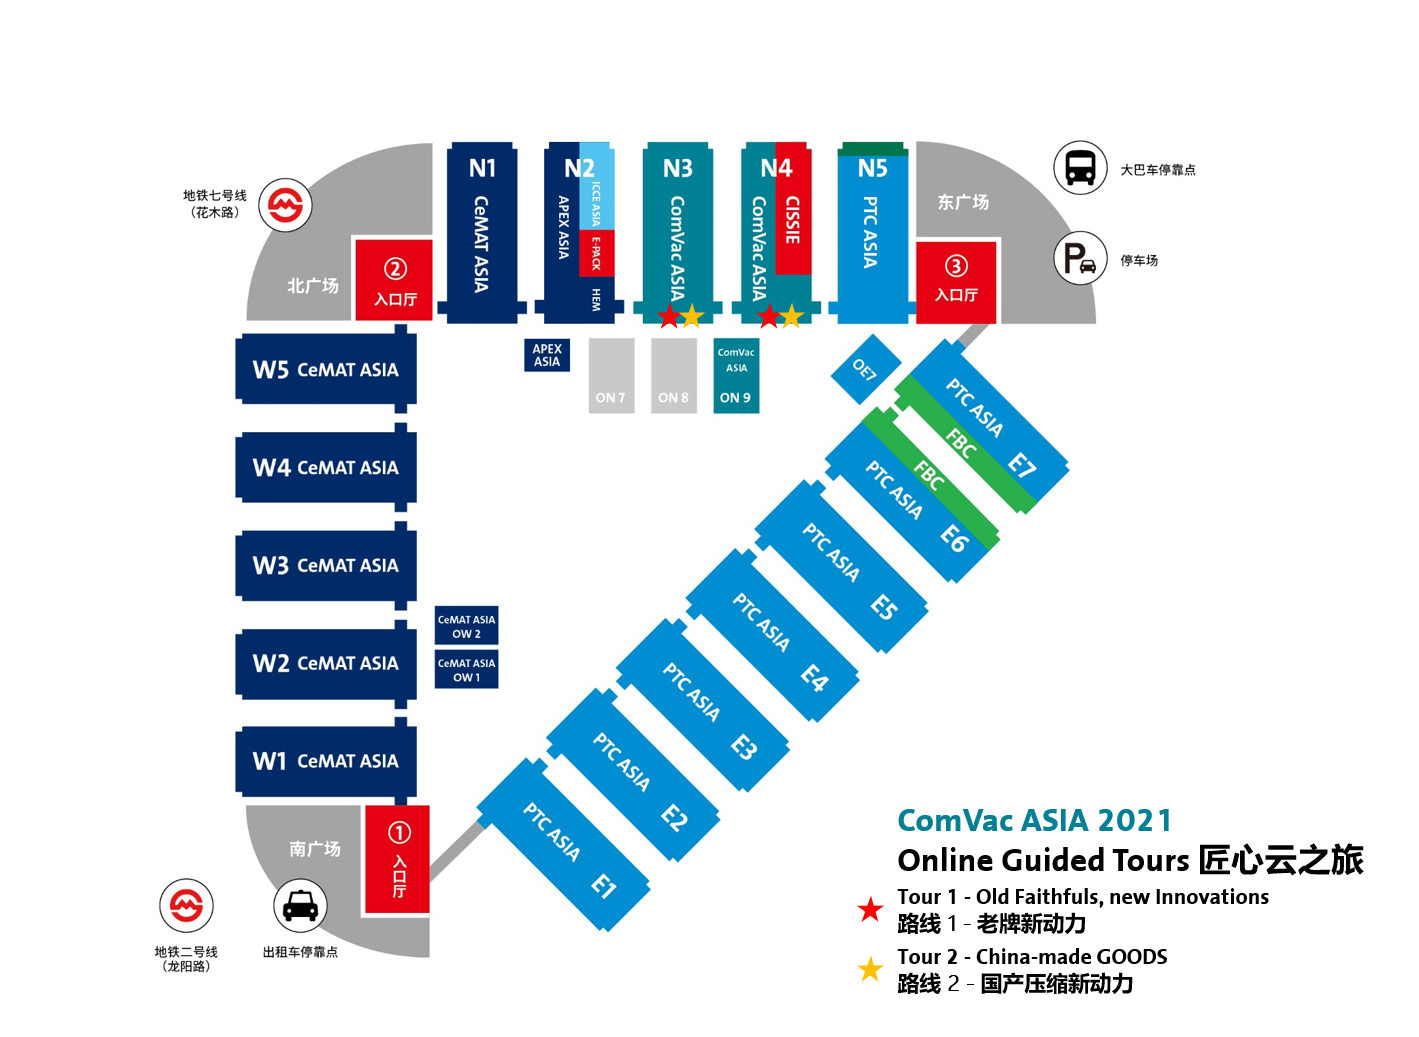 ComVac21_Online Guided Tours_Map 211015.png